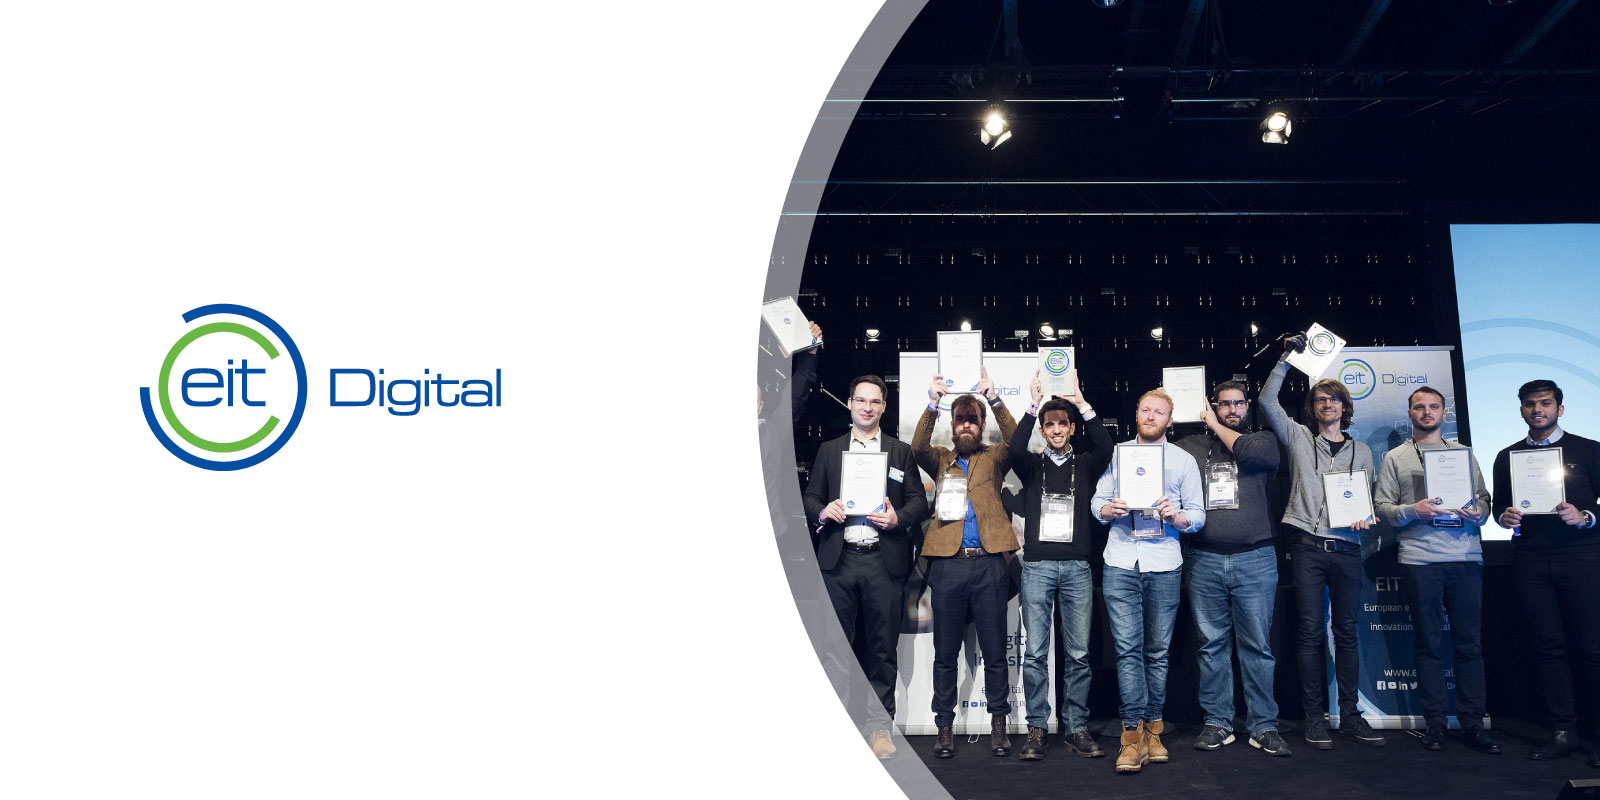 Discover the 25 deep tech innovations entering the EIT Digital Challenge 2017 finals